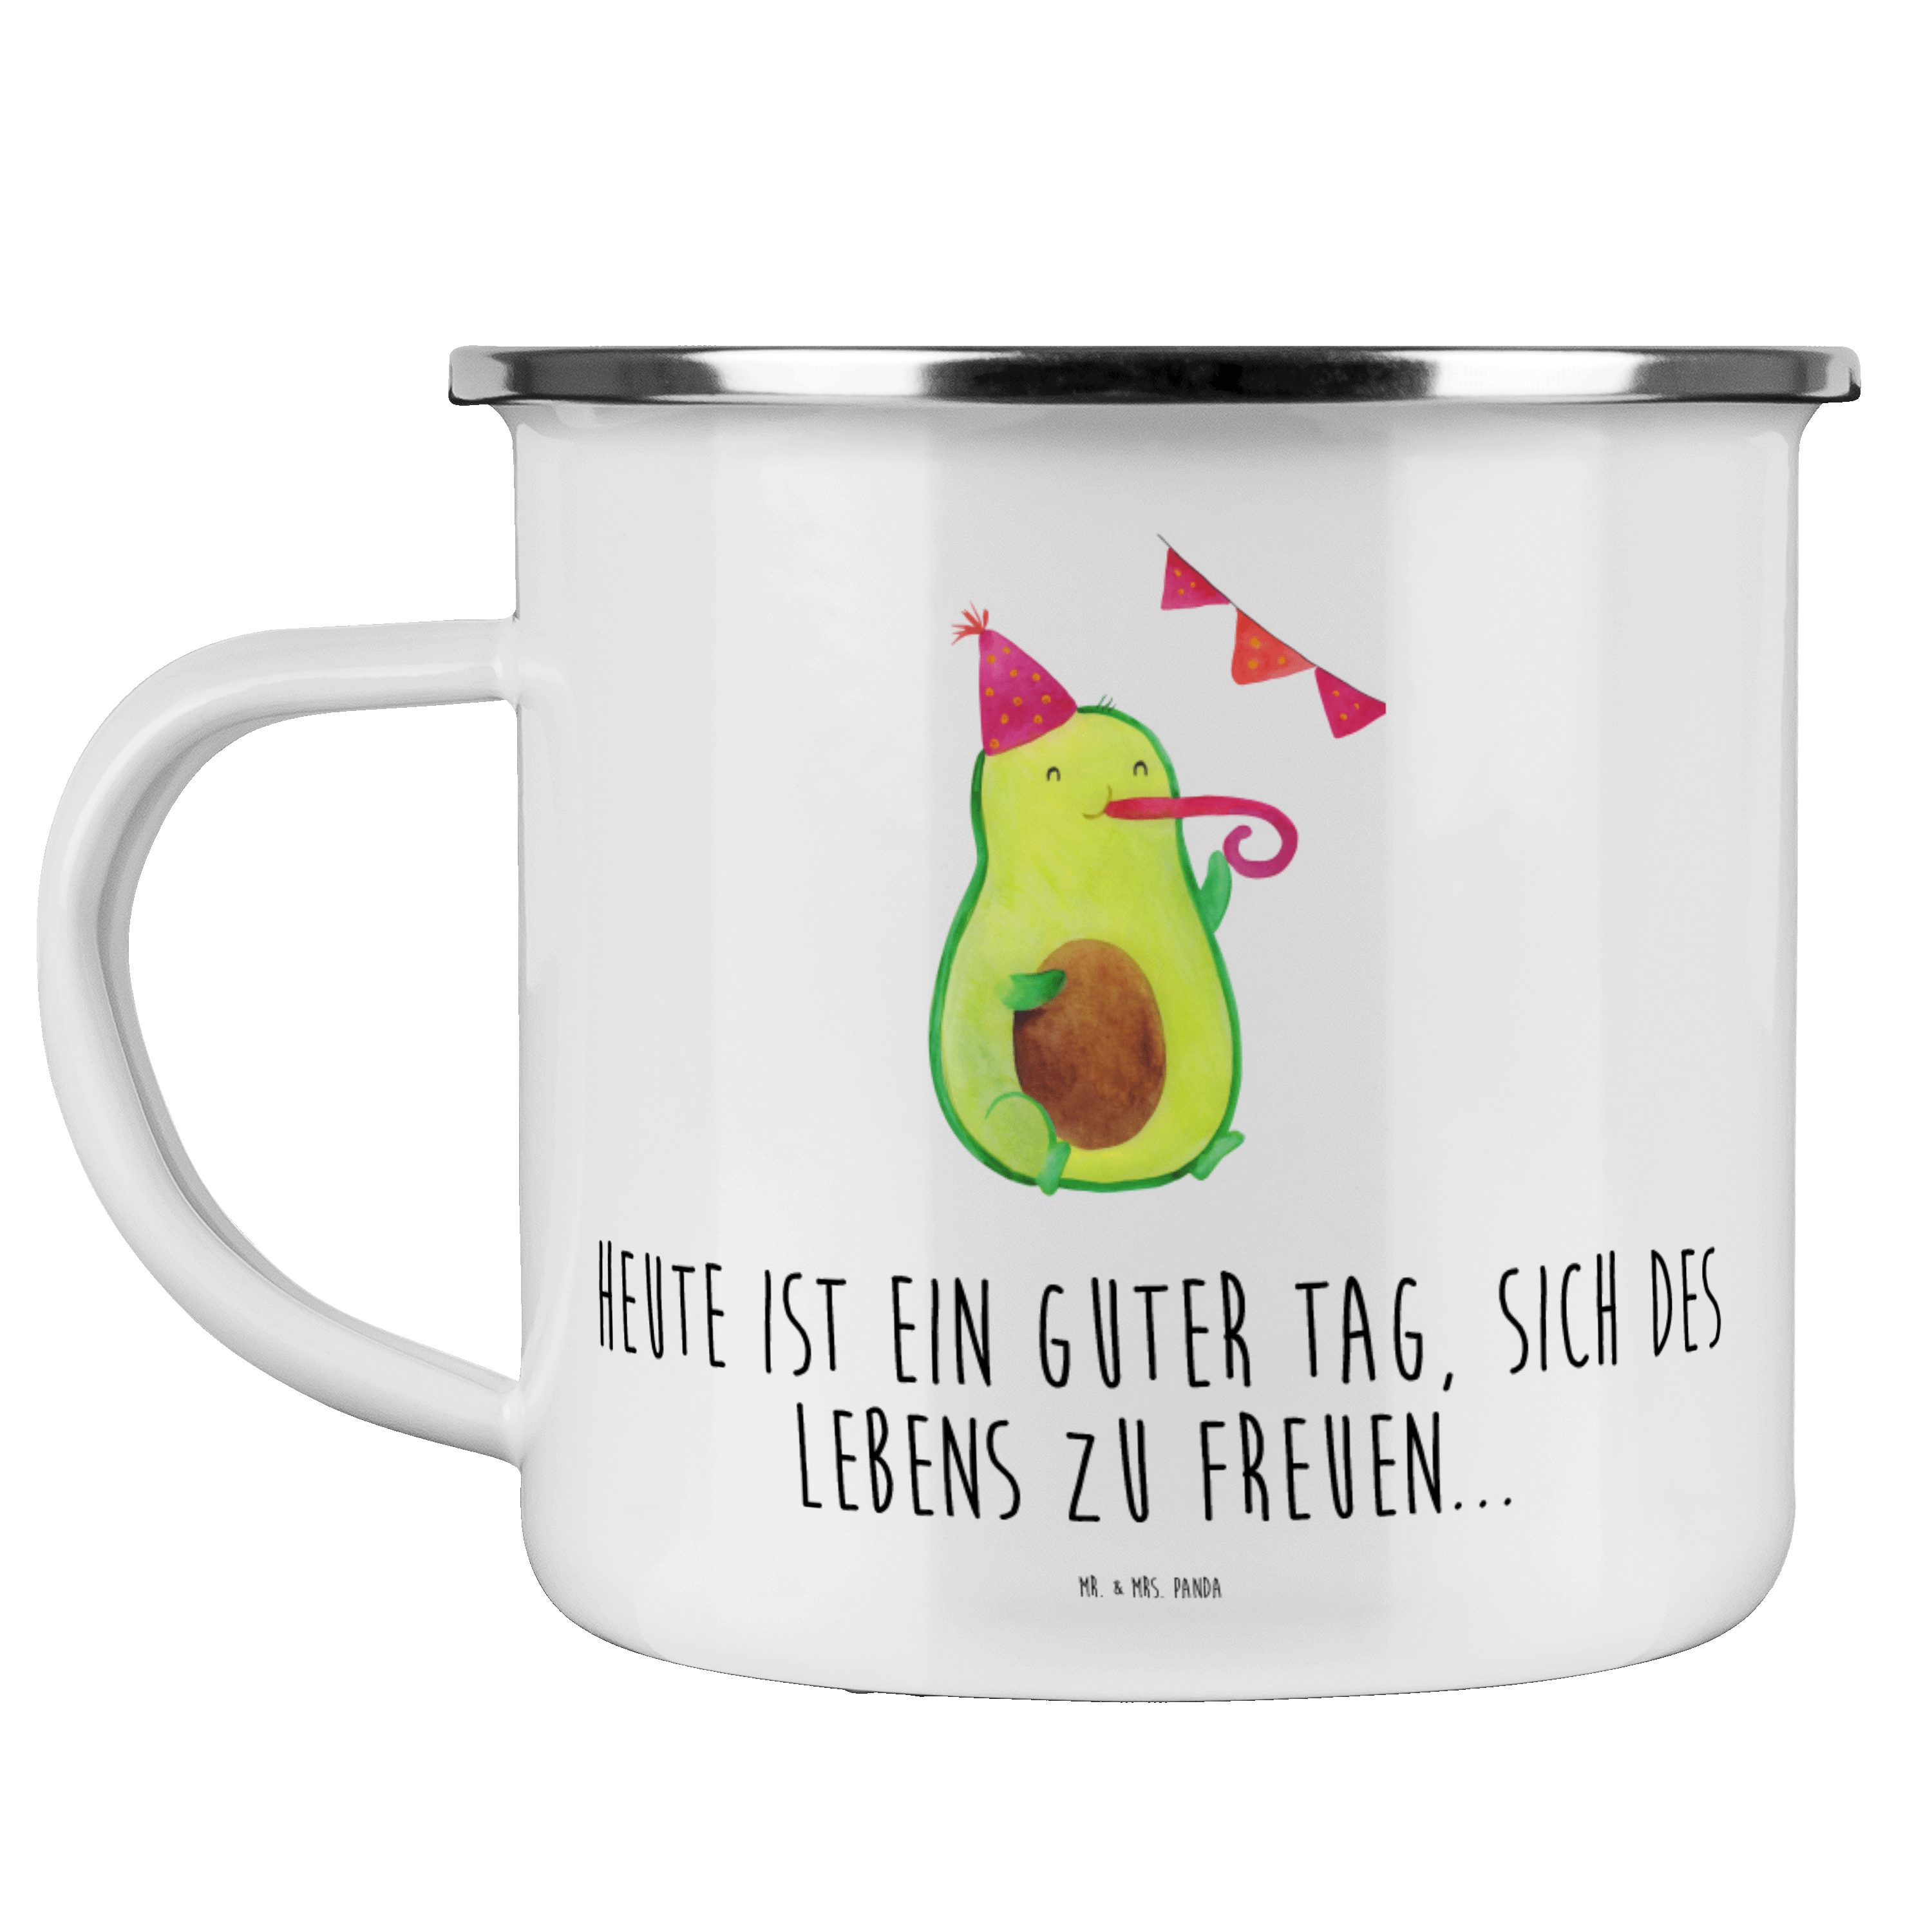 Emaille & Campingbecher, Trink, Weiß Emaille Becher - Mr. Geschenk, - Avocado Mrs. Party Panda Emaille